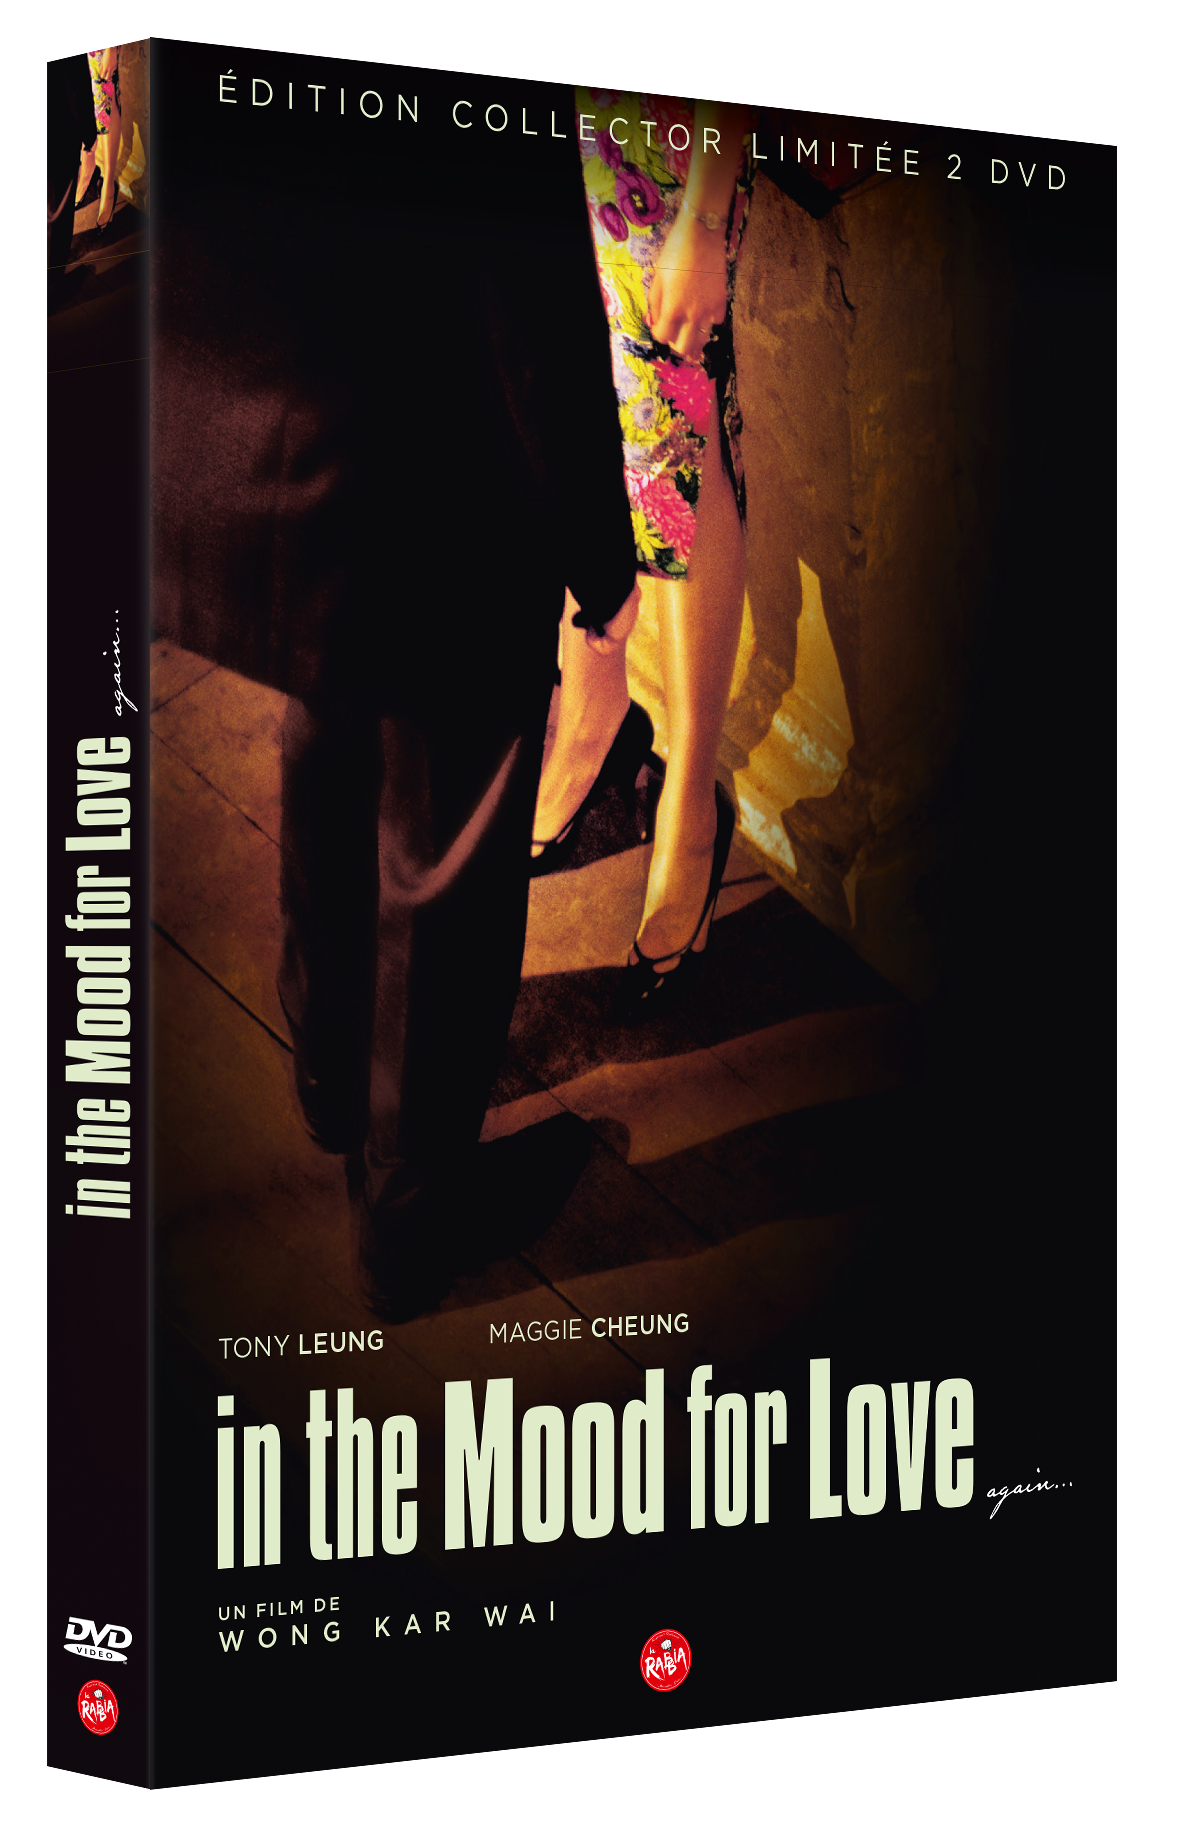 DVD "In The Mood For Love"